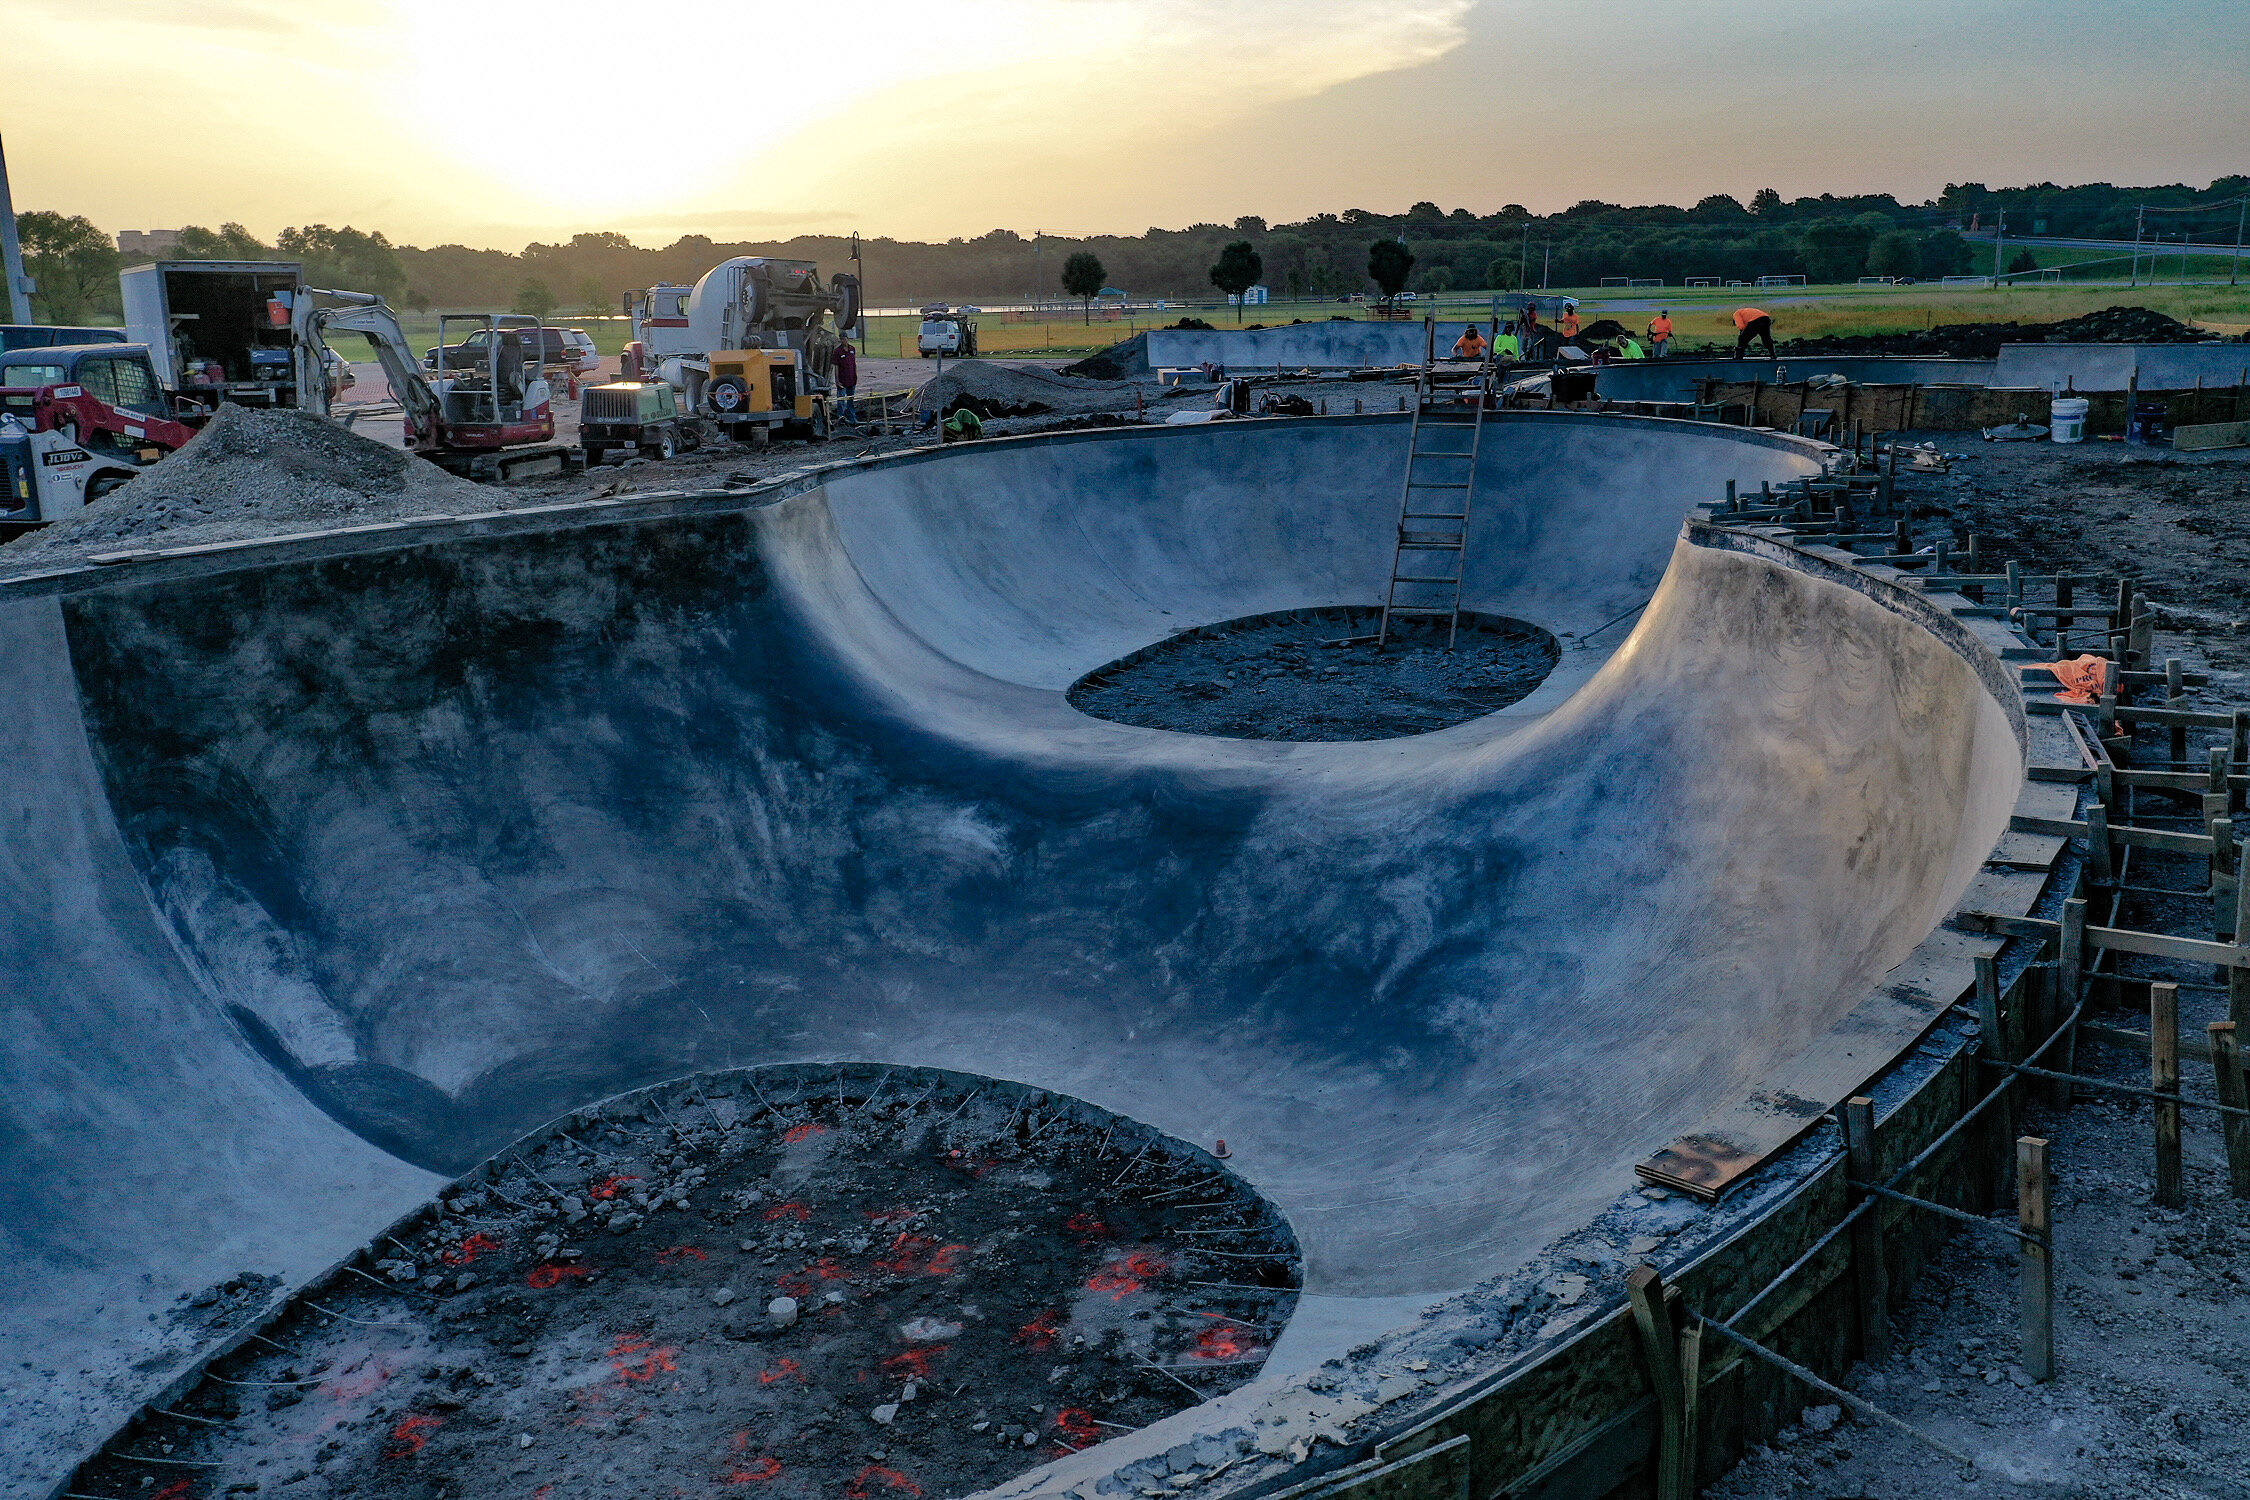 Big Bowl pour 👀 in Bartlesville, Oklahoma. 10 foot deep end with pool coping &amp; tile 😎